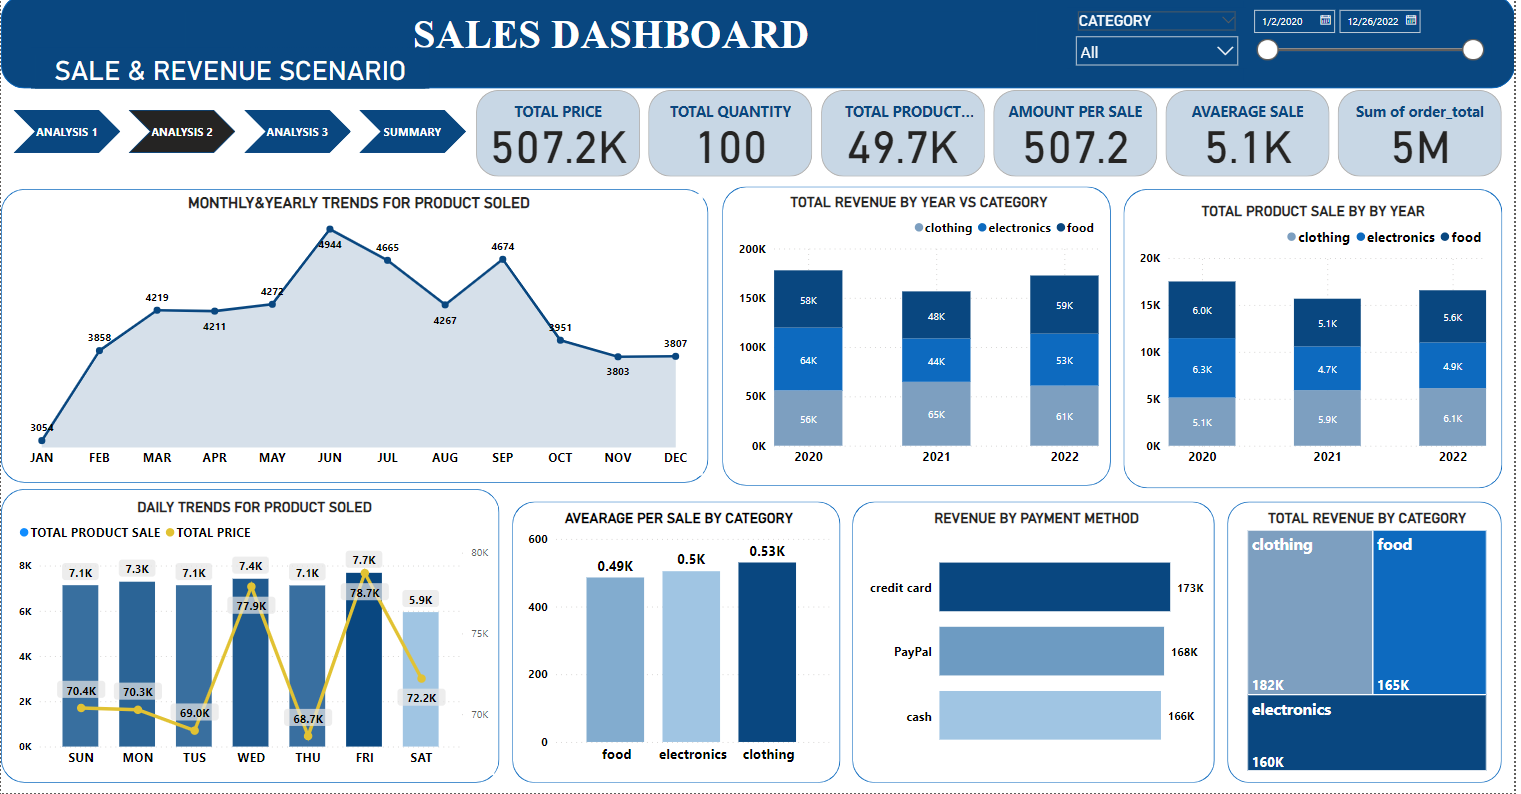 SALES DASHBOARD CATEGORY

AR

SALE & REVENUE SCENARIO
TOTAL PRICE TOTAL QUANTITY TOTAL PRODUCT AMOUNT PER SALE AVAERAGE SALE ‘Sum of order total
DIDDY 5072K 100 497K 5072 5.1K 5M
MONTHLYAYEARLY TRENDS FOR PRODUCT SOLED TOTAL REVENUE BY YEAR VS CATEGORY

© ciothing @ rirctionxs ®lood

 

TOTAL PRODUCT SALE BY BY YEAR

© clothing ® electronics ®100d

 

 

room
rox
nox -
rox rox
pe
sox ww
p
ox o
AN BB MAR APR MAY UN IL AUG SEP OCT NOV DRC 020 2071 000 020 2071 2000
DAILY TRENDS FOR PRODUCT SOLED
AVEARAGE PER SALE BY CATEGORY REVENUE BY PAYMENT METHOD TOTAL REVENUE BY CATEGORY
TOTAL PRODIX T SALE © TOTAL PRICE wo
053K
1 05K
“ = gm U8 g 049%
1 1 w maw
7x. edit cae en
w I ~ 00
“ ~~
oe
rox
" li Ww 1m
-—
aE - -

 

 

MON Tus WID Tau BRI SAT food electrons clothing